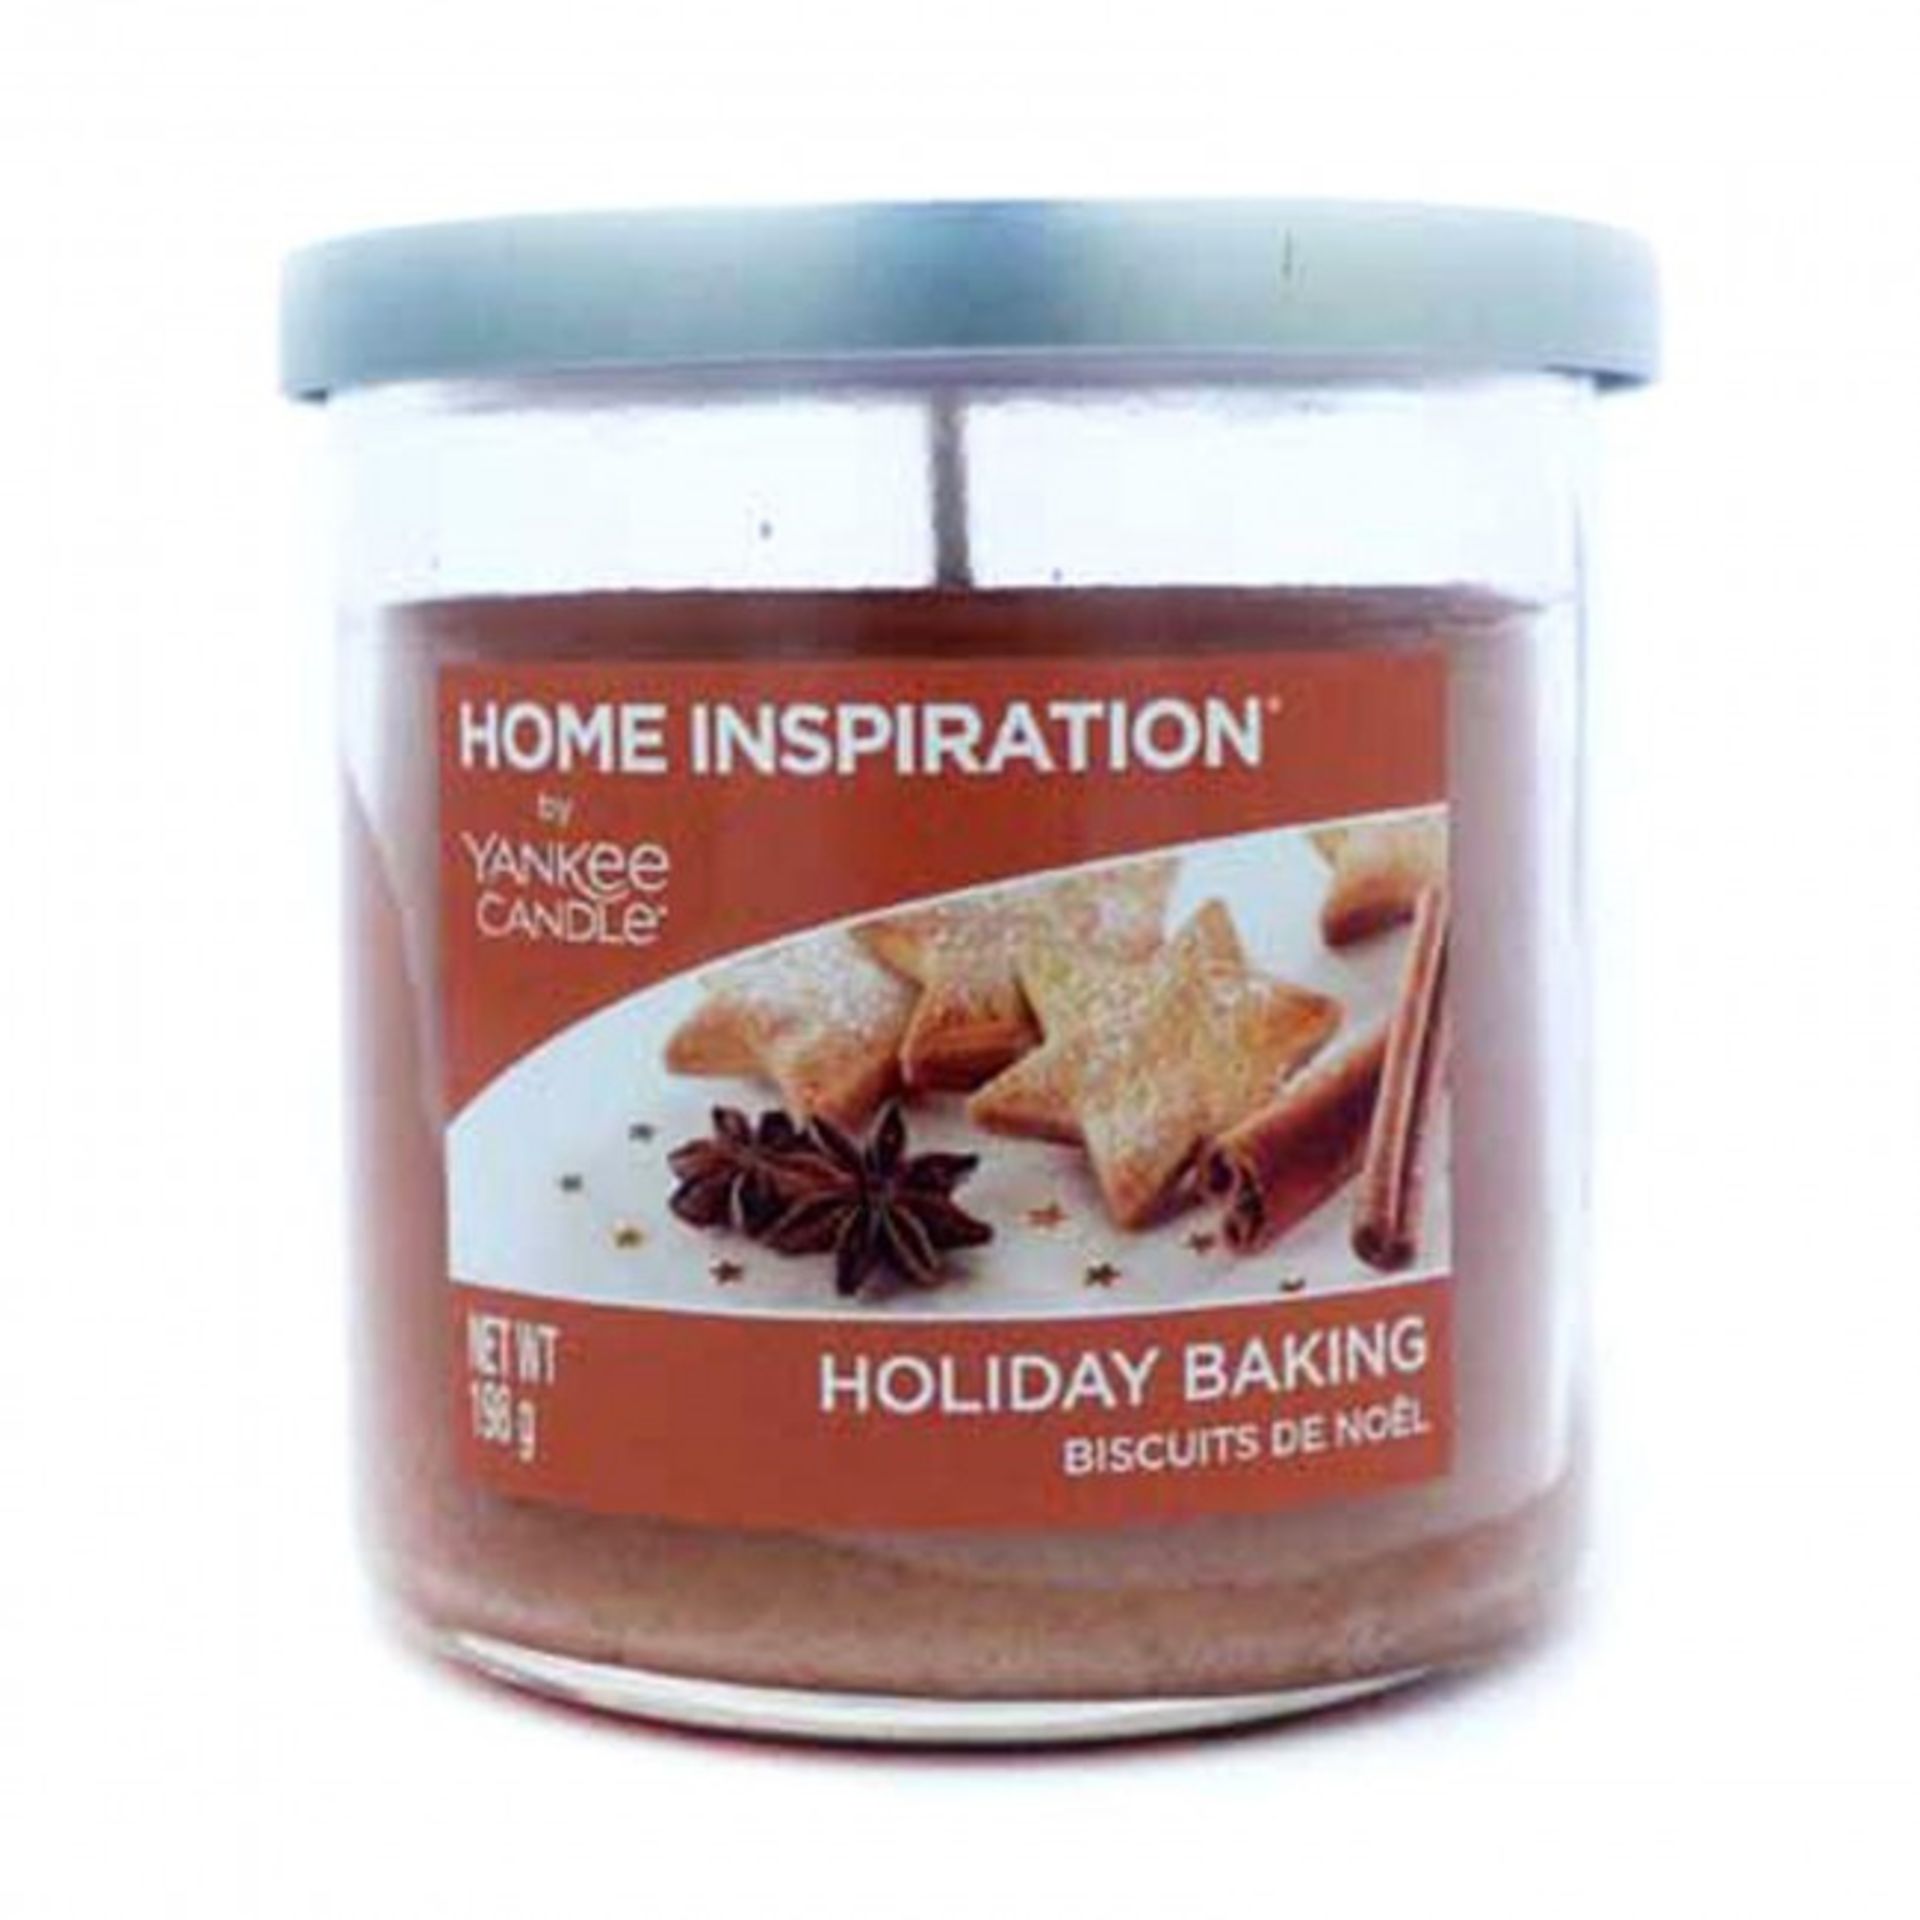 V Brand New Home Inspiration by Yankee Candle Holiday Baking 198g Tumbler Candle - ISP £7.99 Ebay